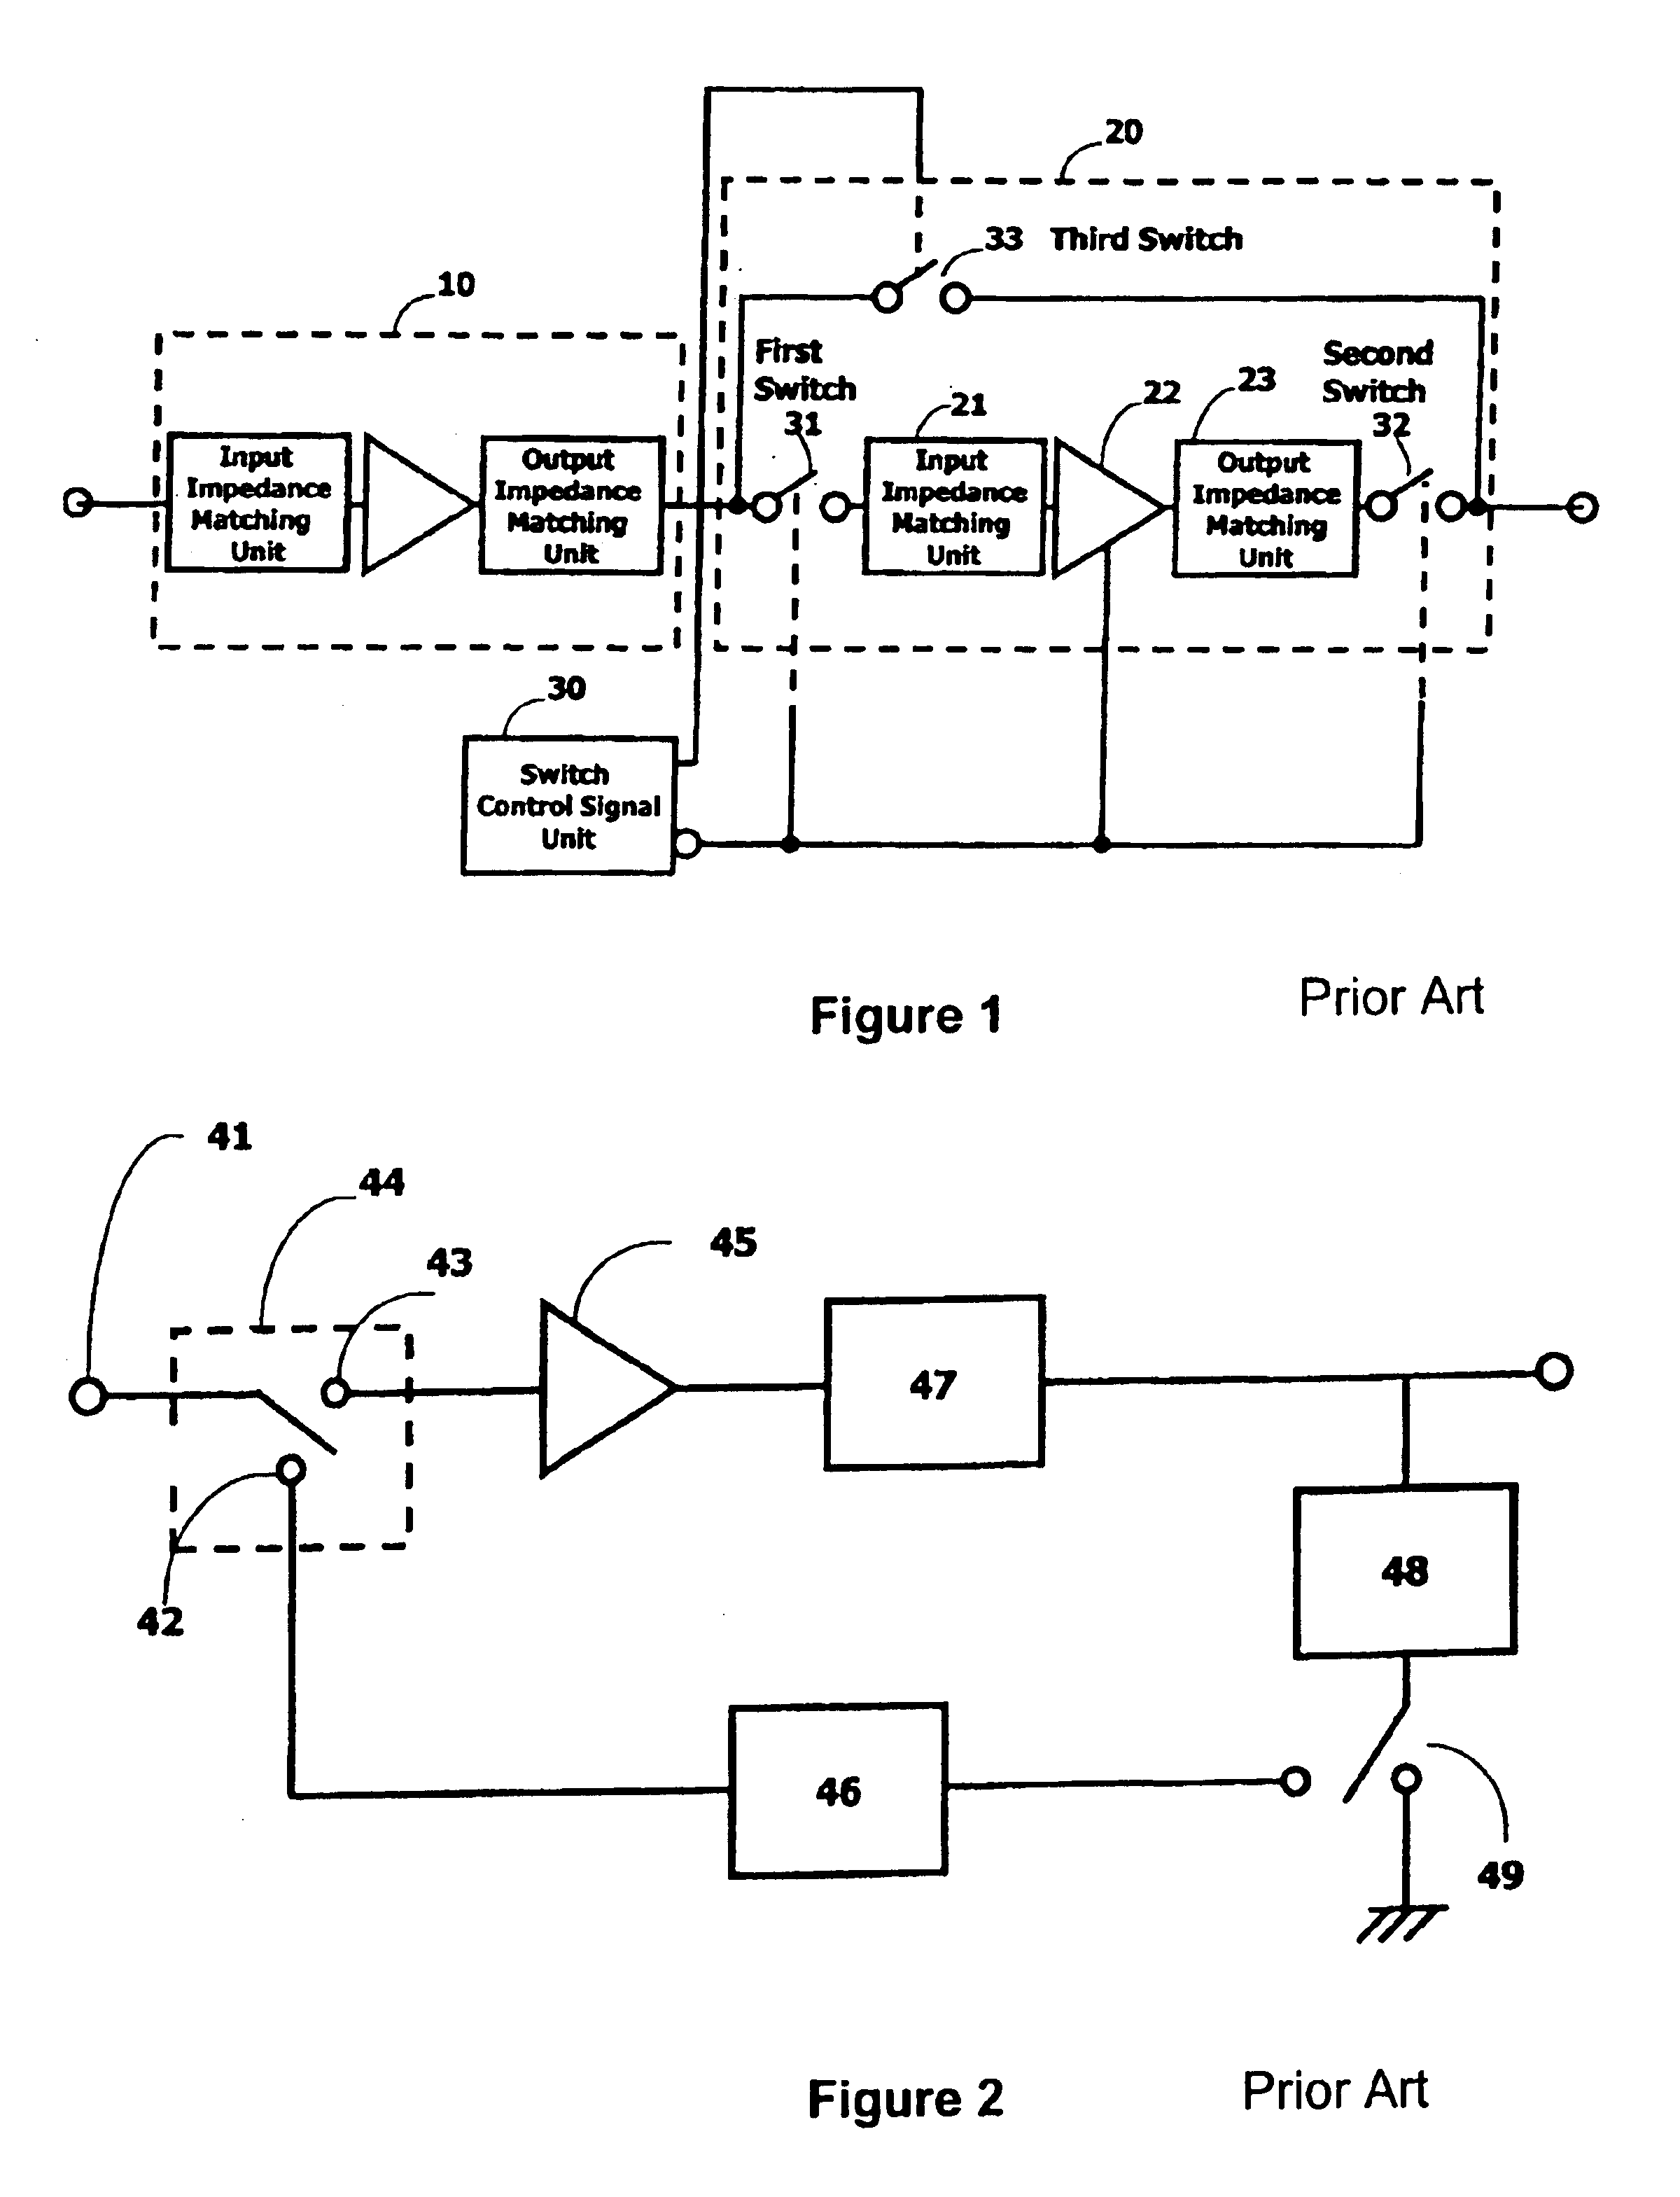 High efficiency power amplifier with multiple power modes